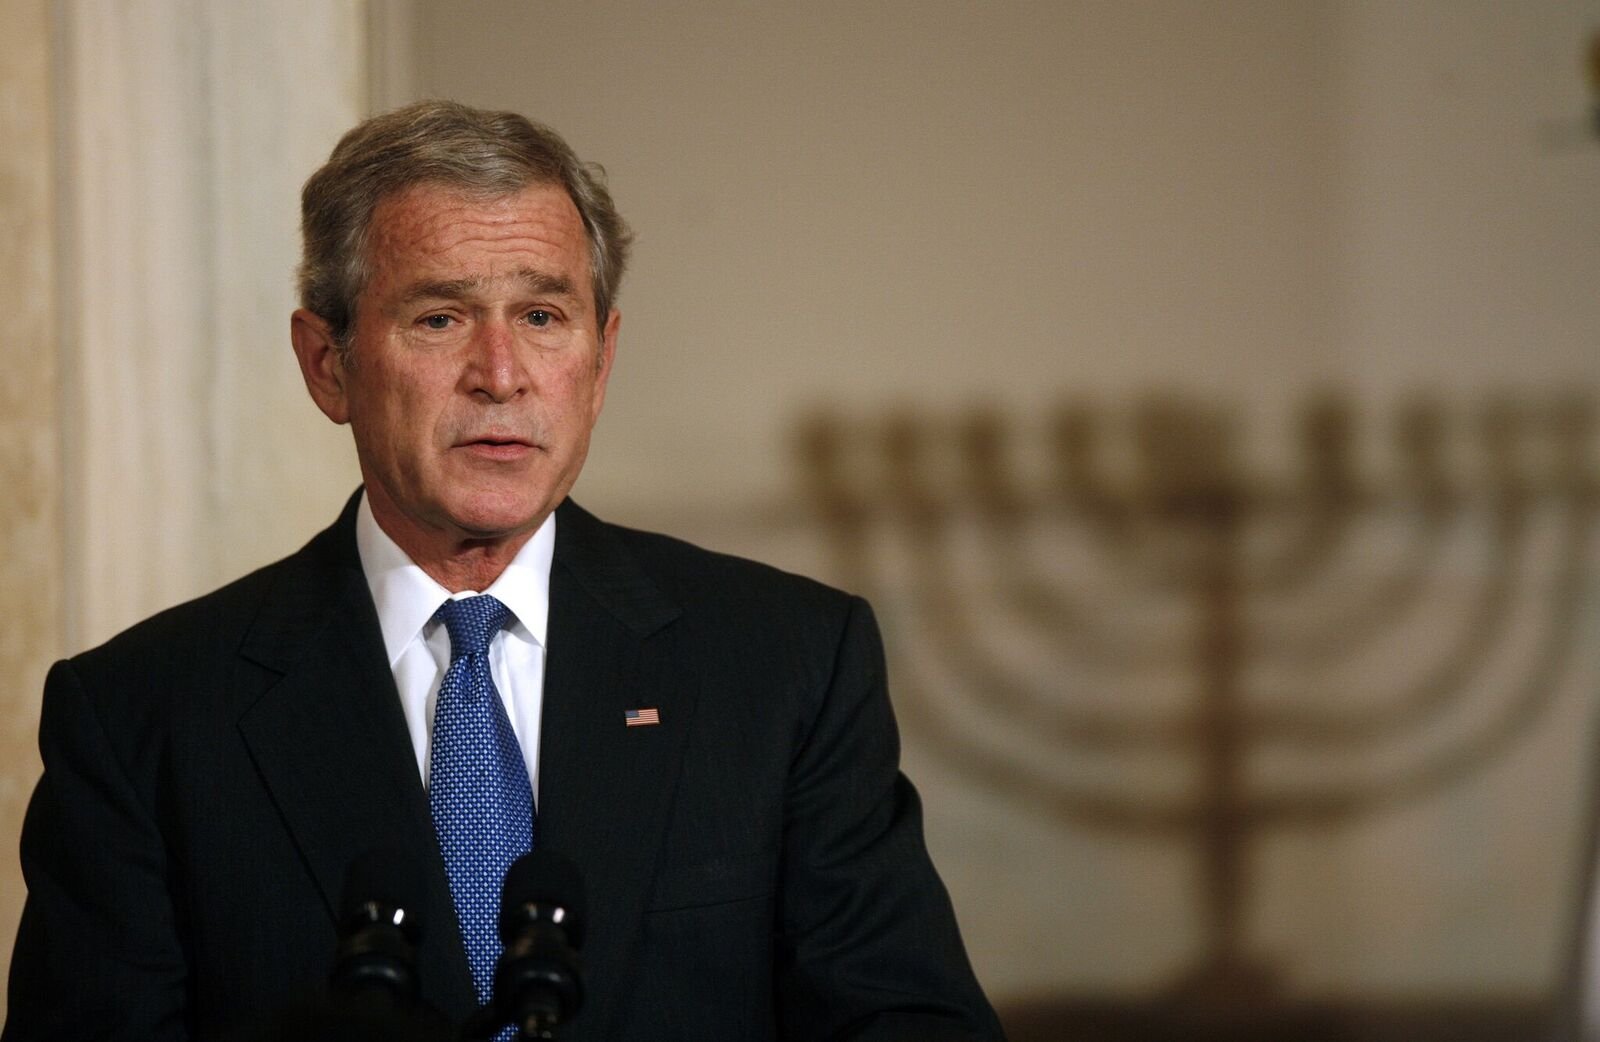 George W. Bush at a Hanukkah Reception in the Grand Foyer of the White House on December 15, 2008, in Washington, DC | Photo: Getty Images